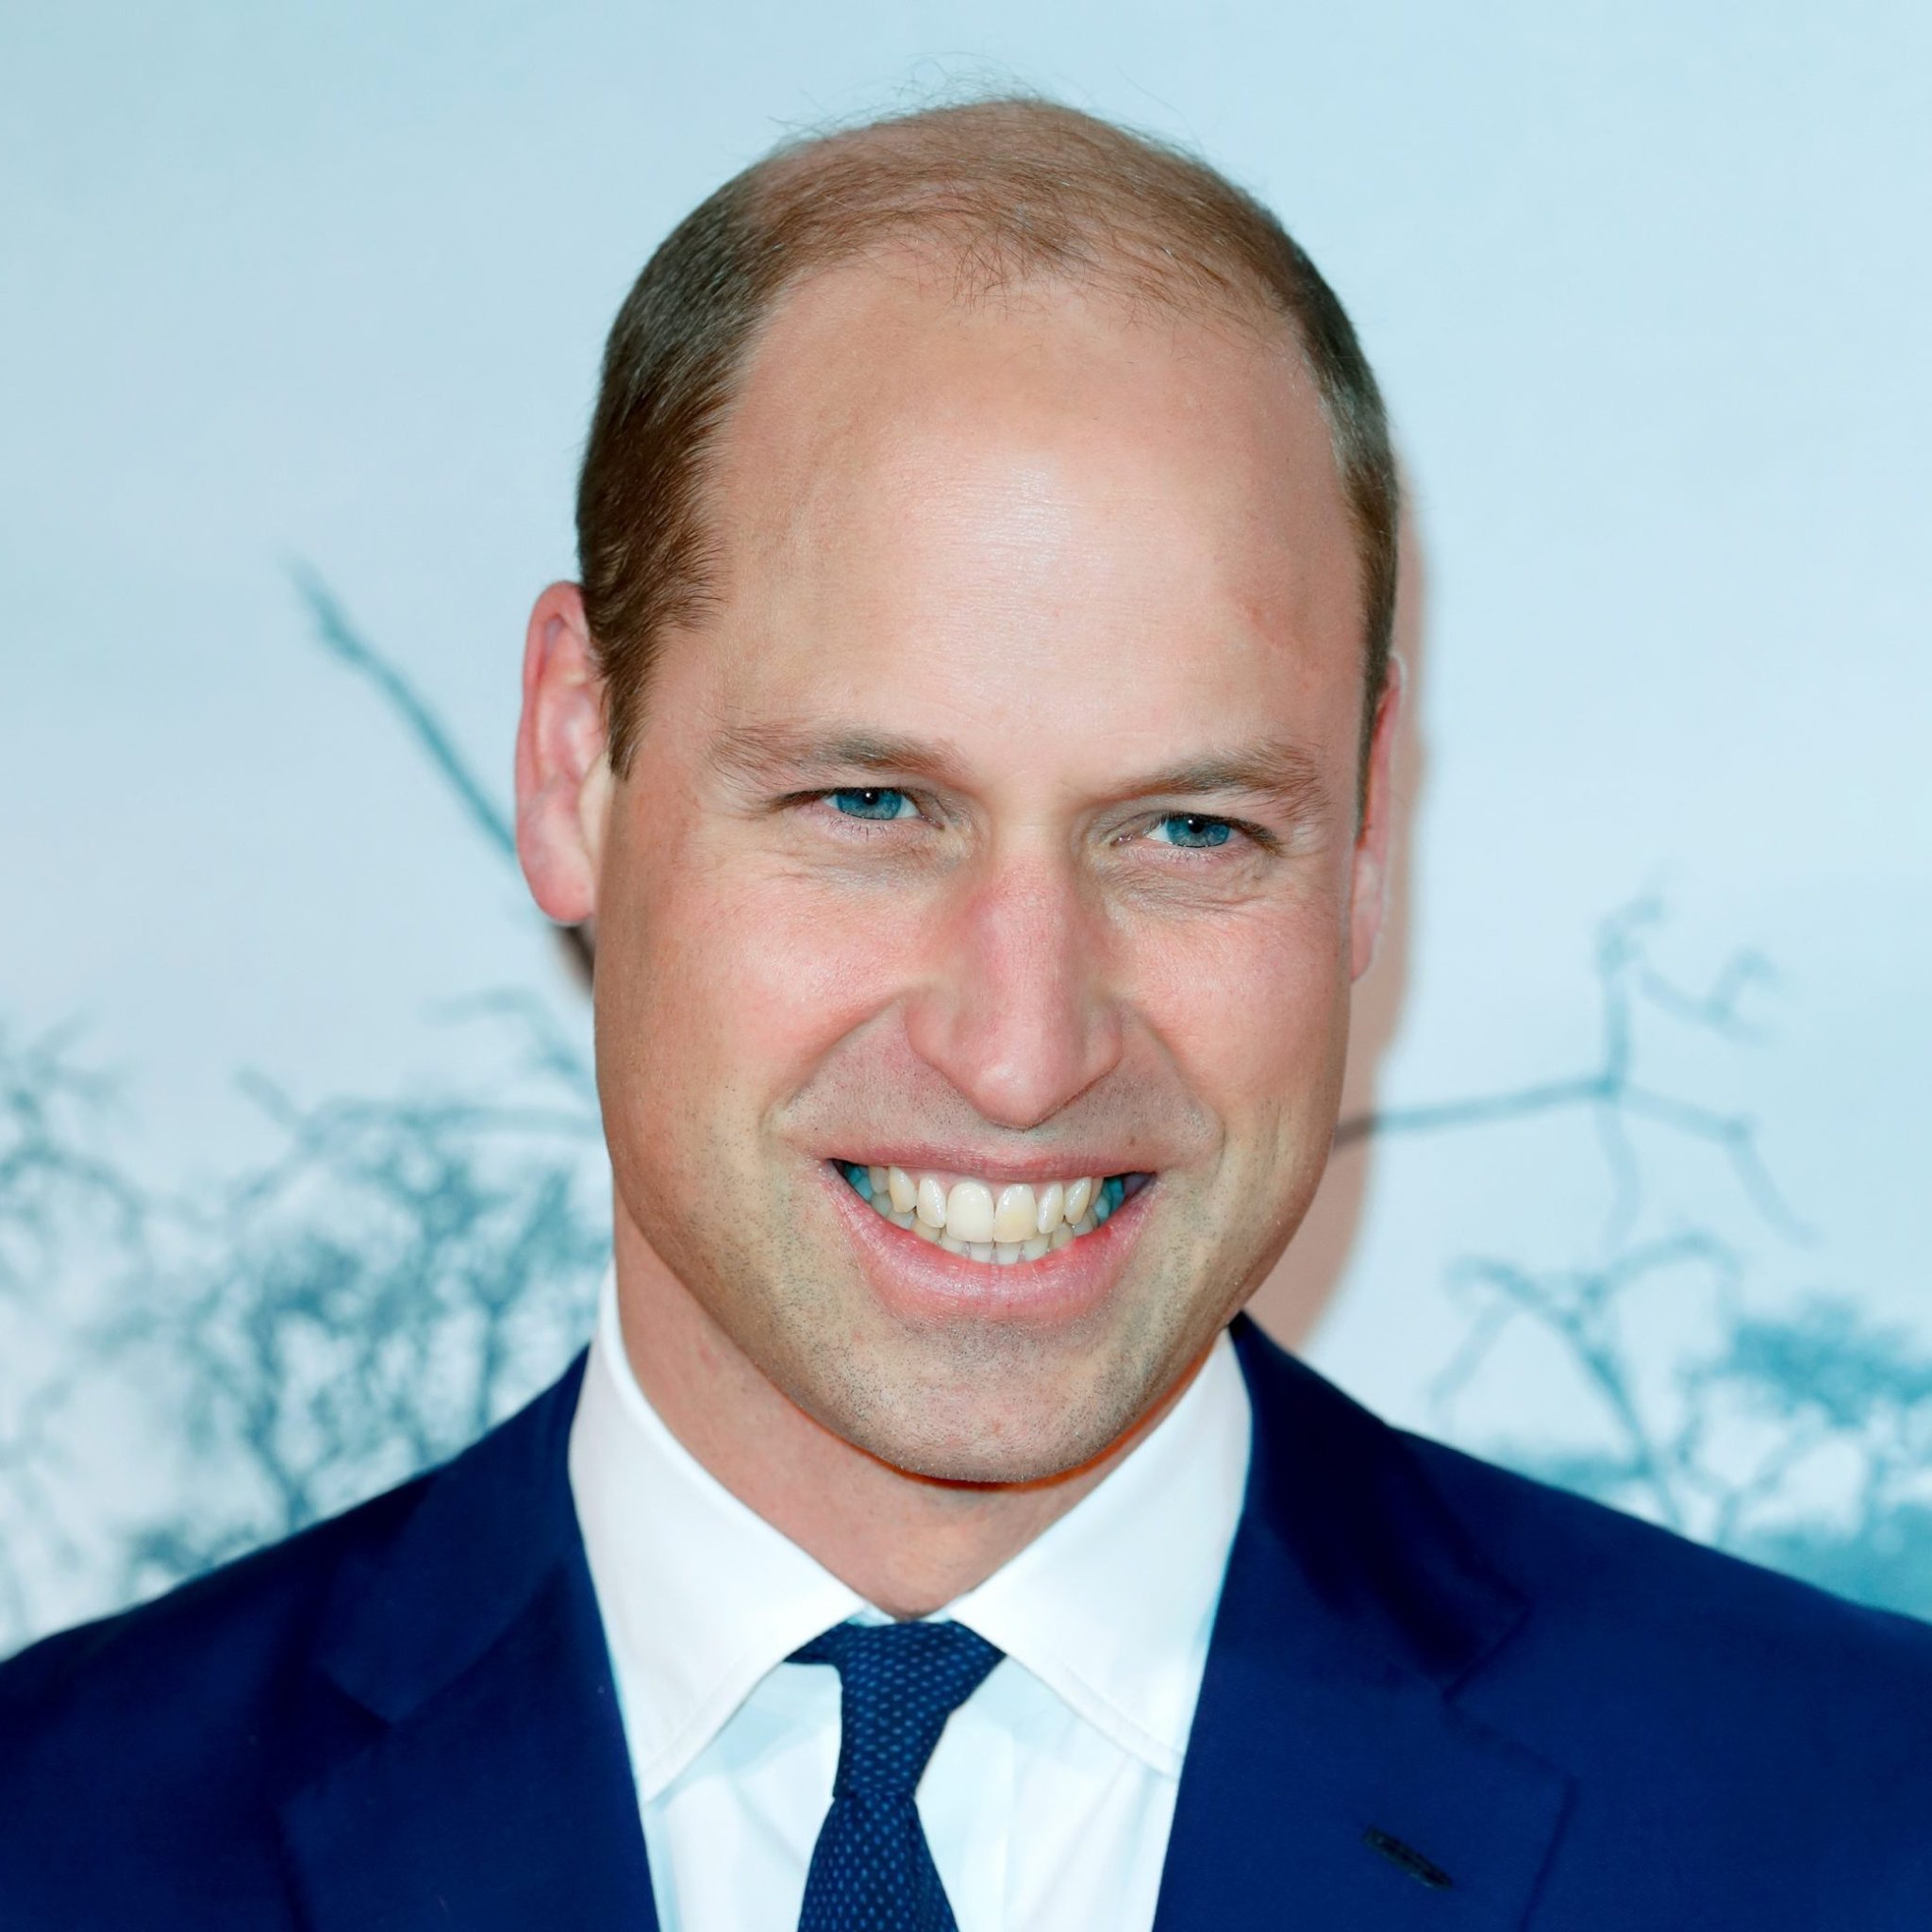 You Won’t Believe How Flirty Prince William's Nickname from Kate Middleton Is